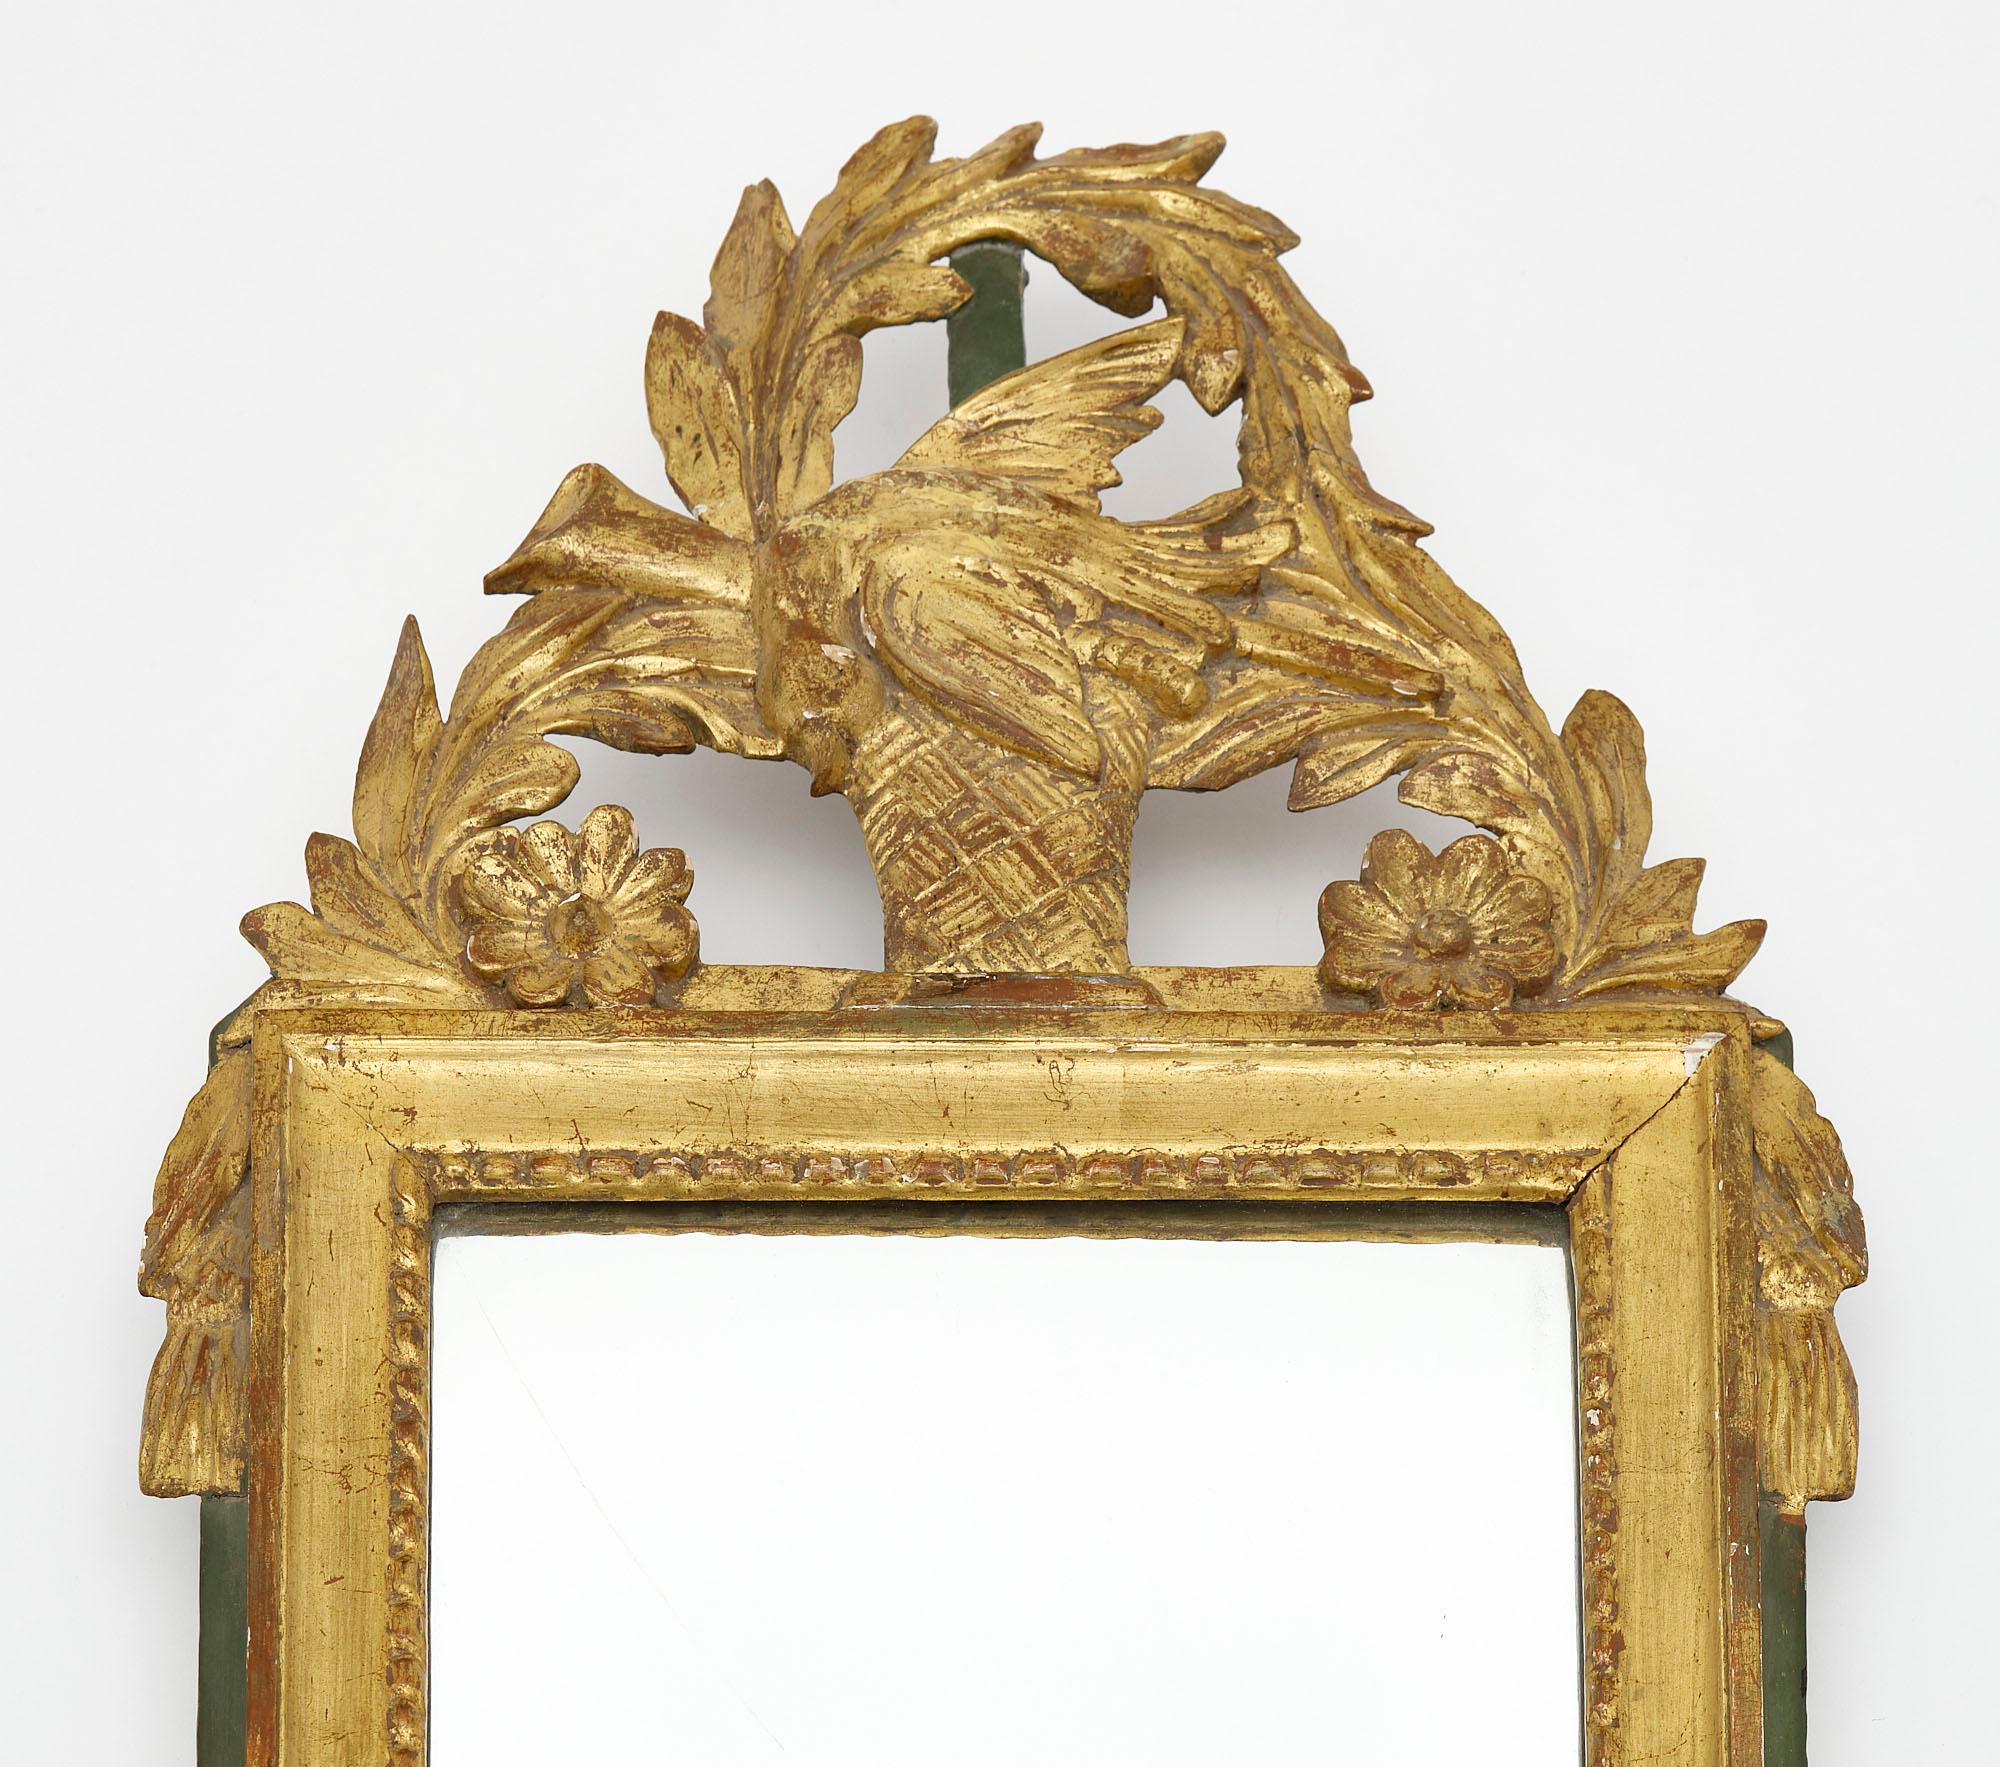 Mirror from France in the Louis XVI period. This piece is made of stuccoed hand-carved wood with a fronton that features a bird, floral motifs, and laurel wreath. The 24 carat gold leafing is original, as is the original mercury mirror.